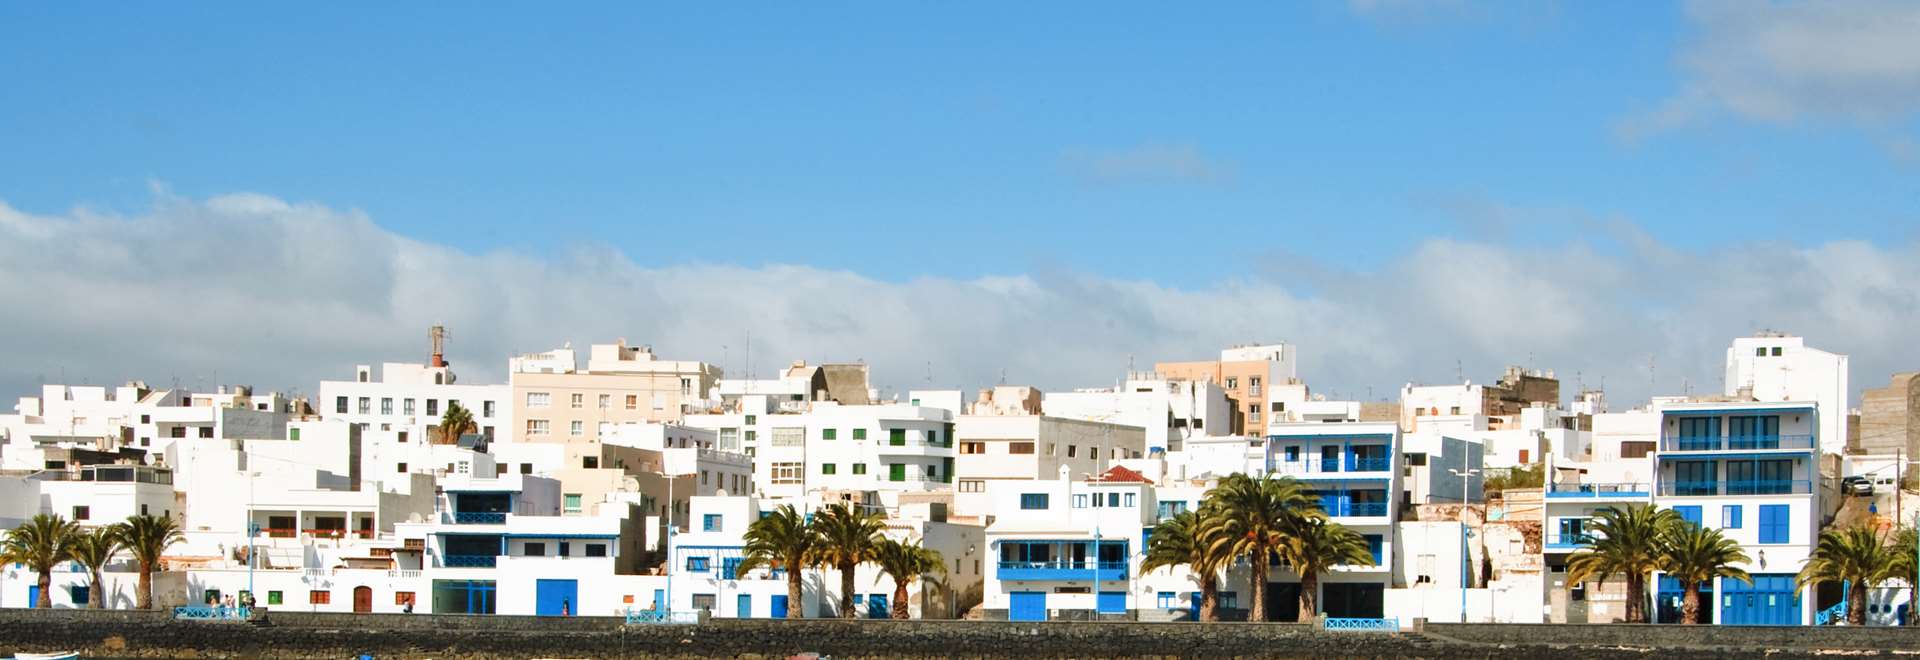 cheap flights to lanzarote from belfast